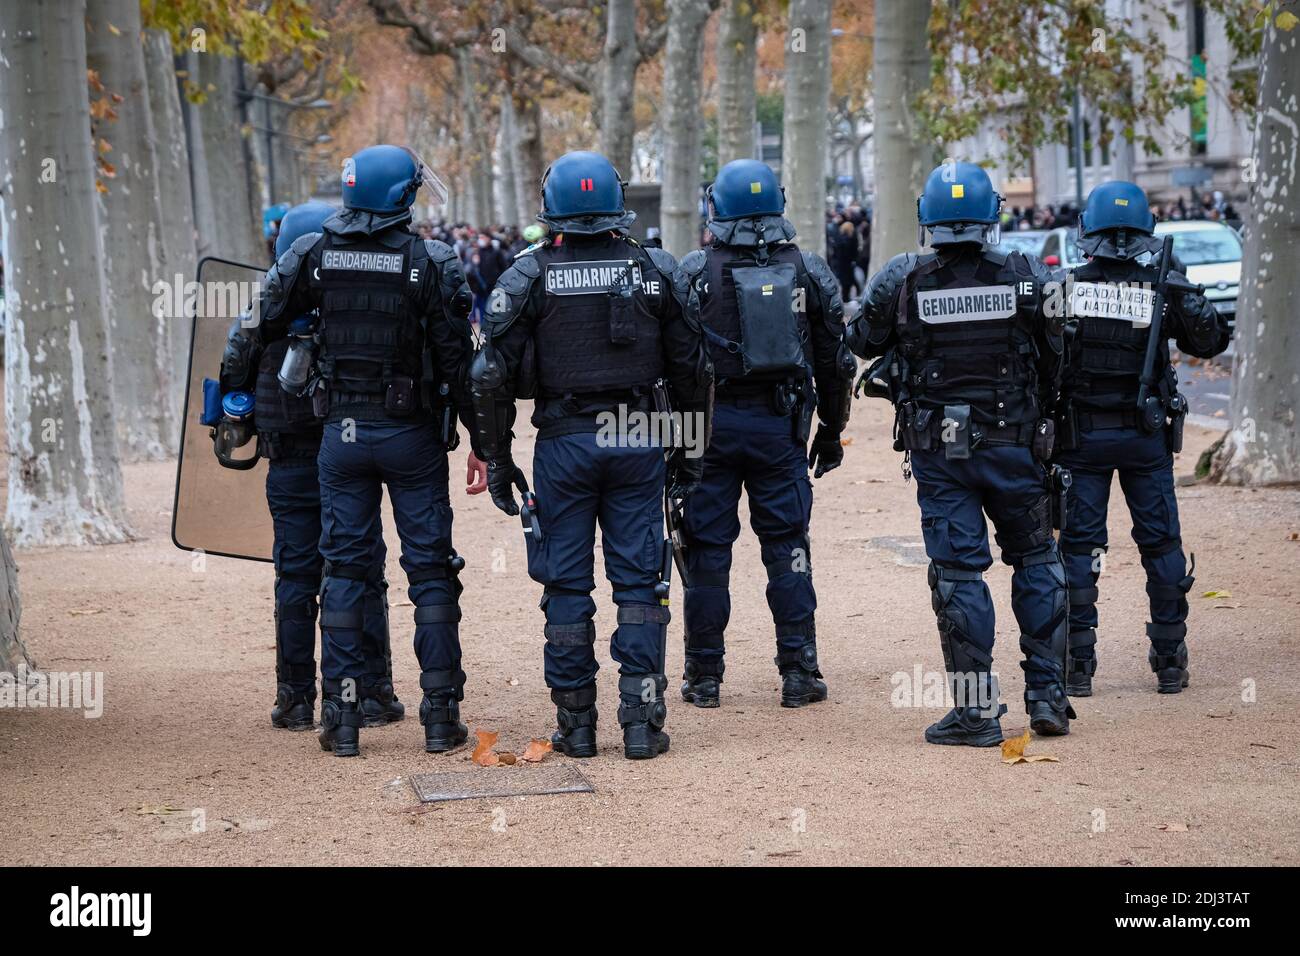 Lyon (France), 12 December 2020. 2000 demonstrators according to the Rhône prefecture for this new pride march in Lyon. Law enforcement in action. Stock Photo